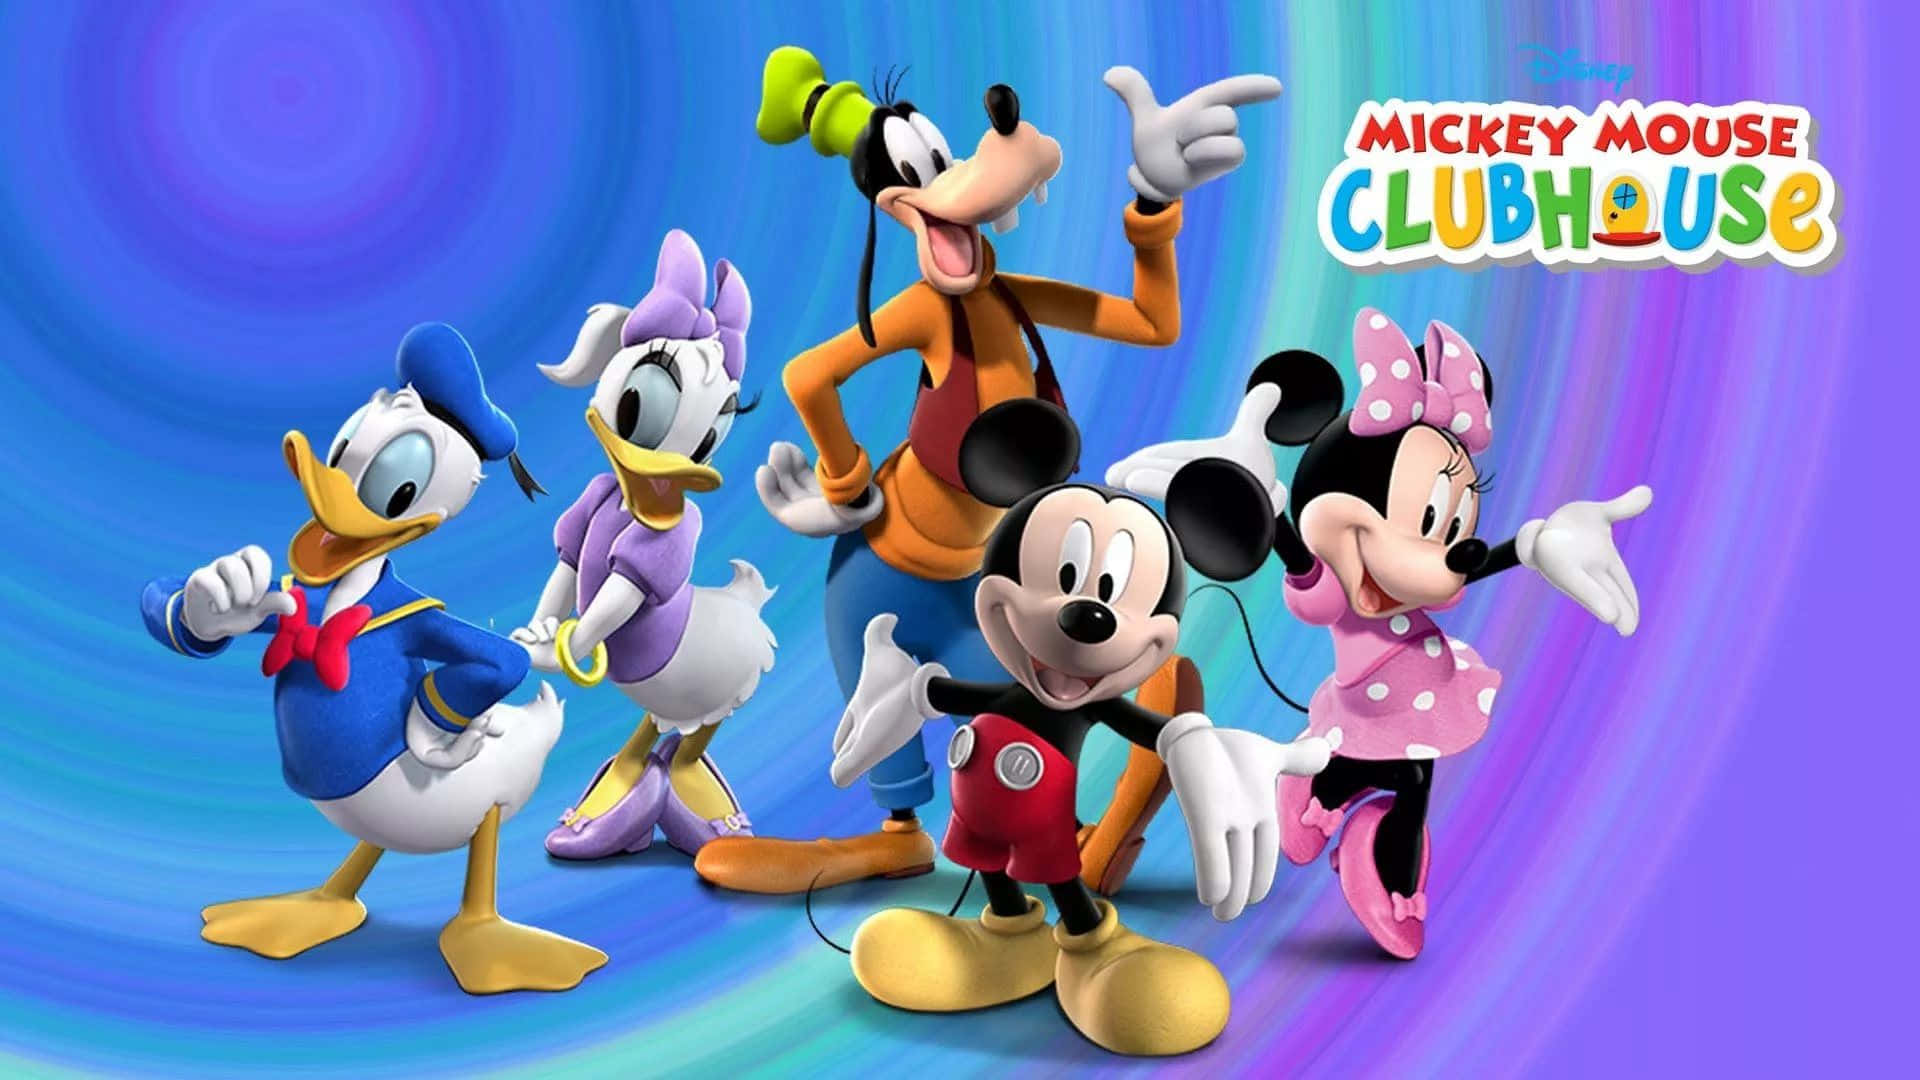 Mickeymouse Clubhouse Bakgrund